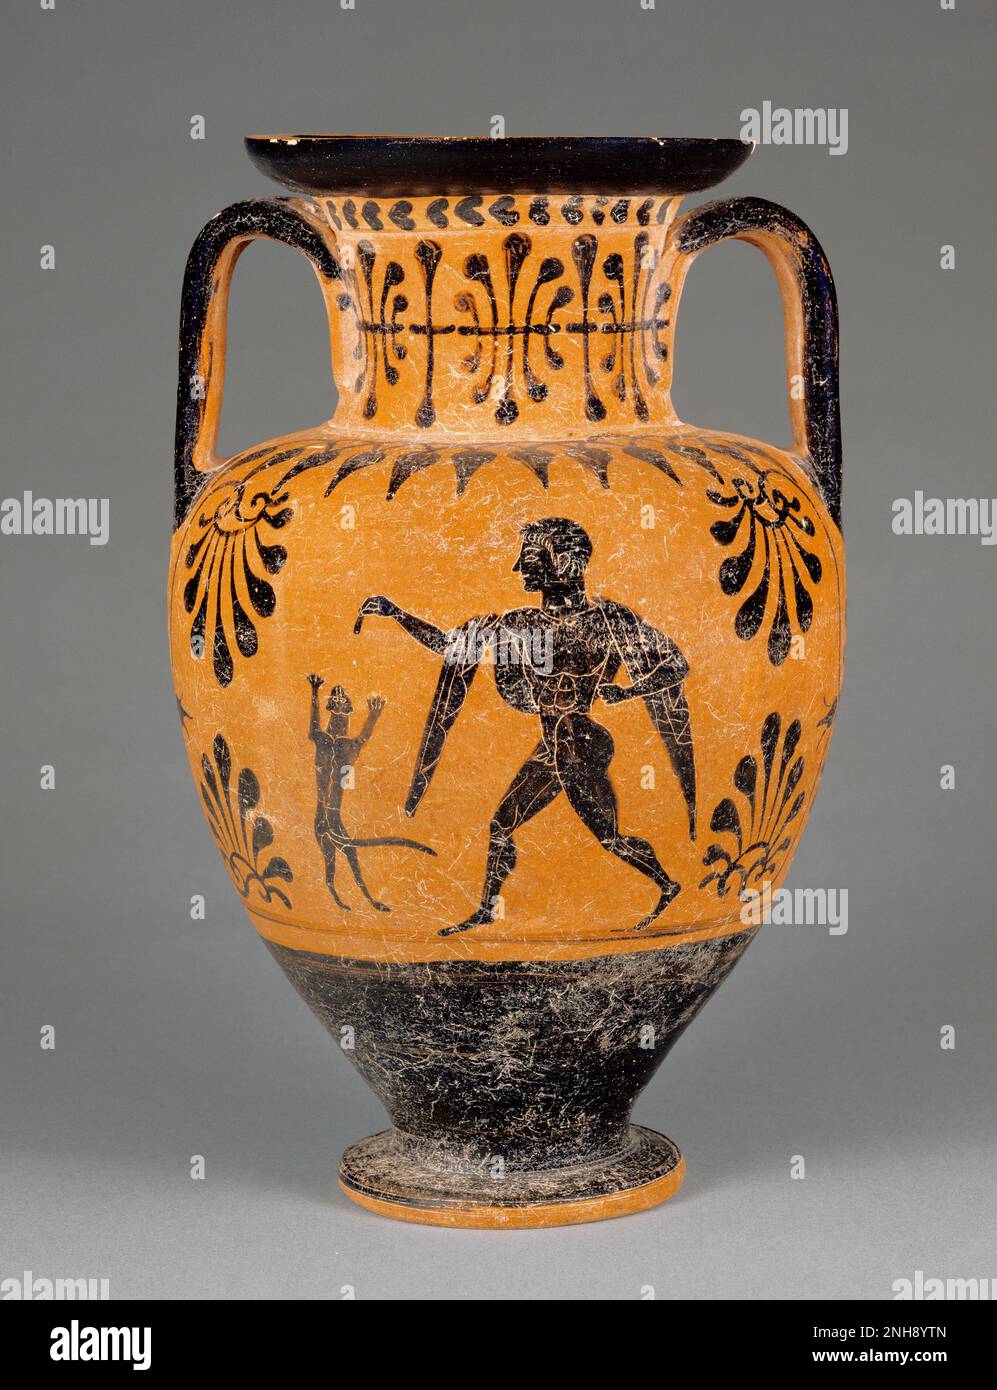 Neck-Amphora; Attributed to the Lotus Bud Group; about 490 B.C.; Terracotta. A nude youth wearing a chlamys over his shoulders holds a morsel of food for a long-tailed cat, who leaps up with its forelegs to snatch the tempting treat. Stock Photo